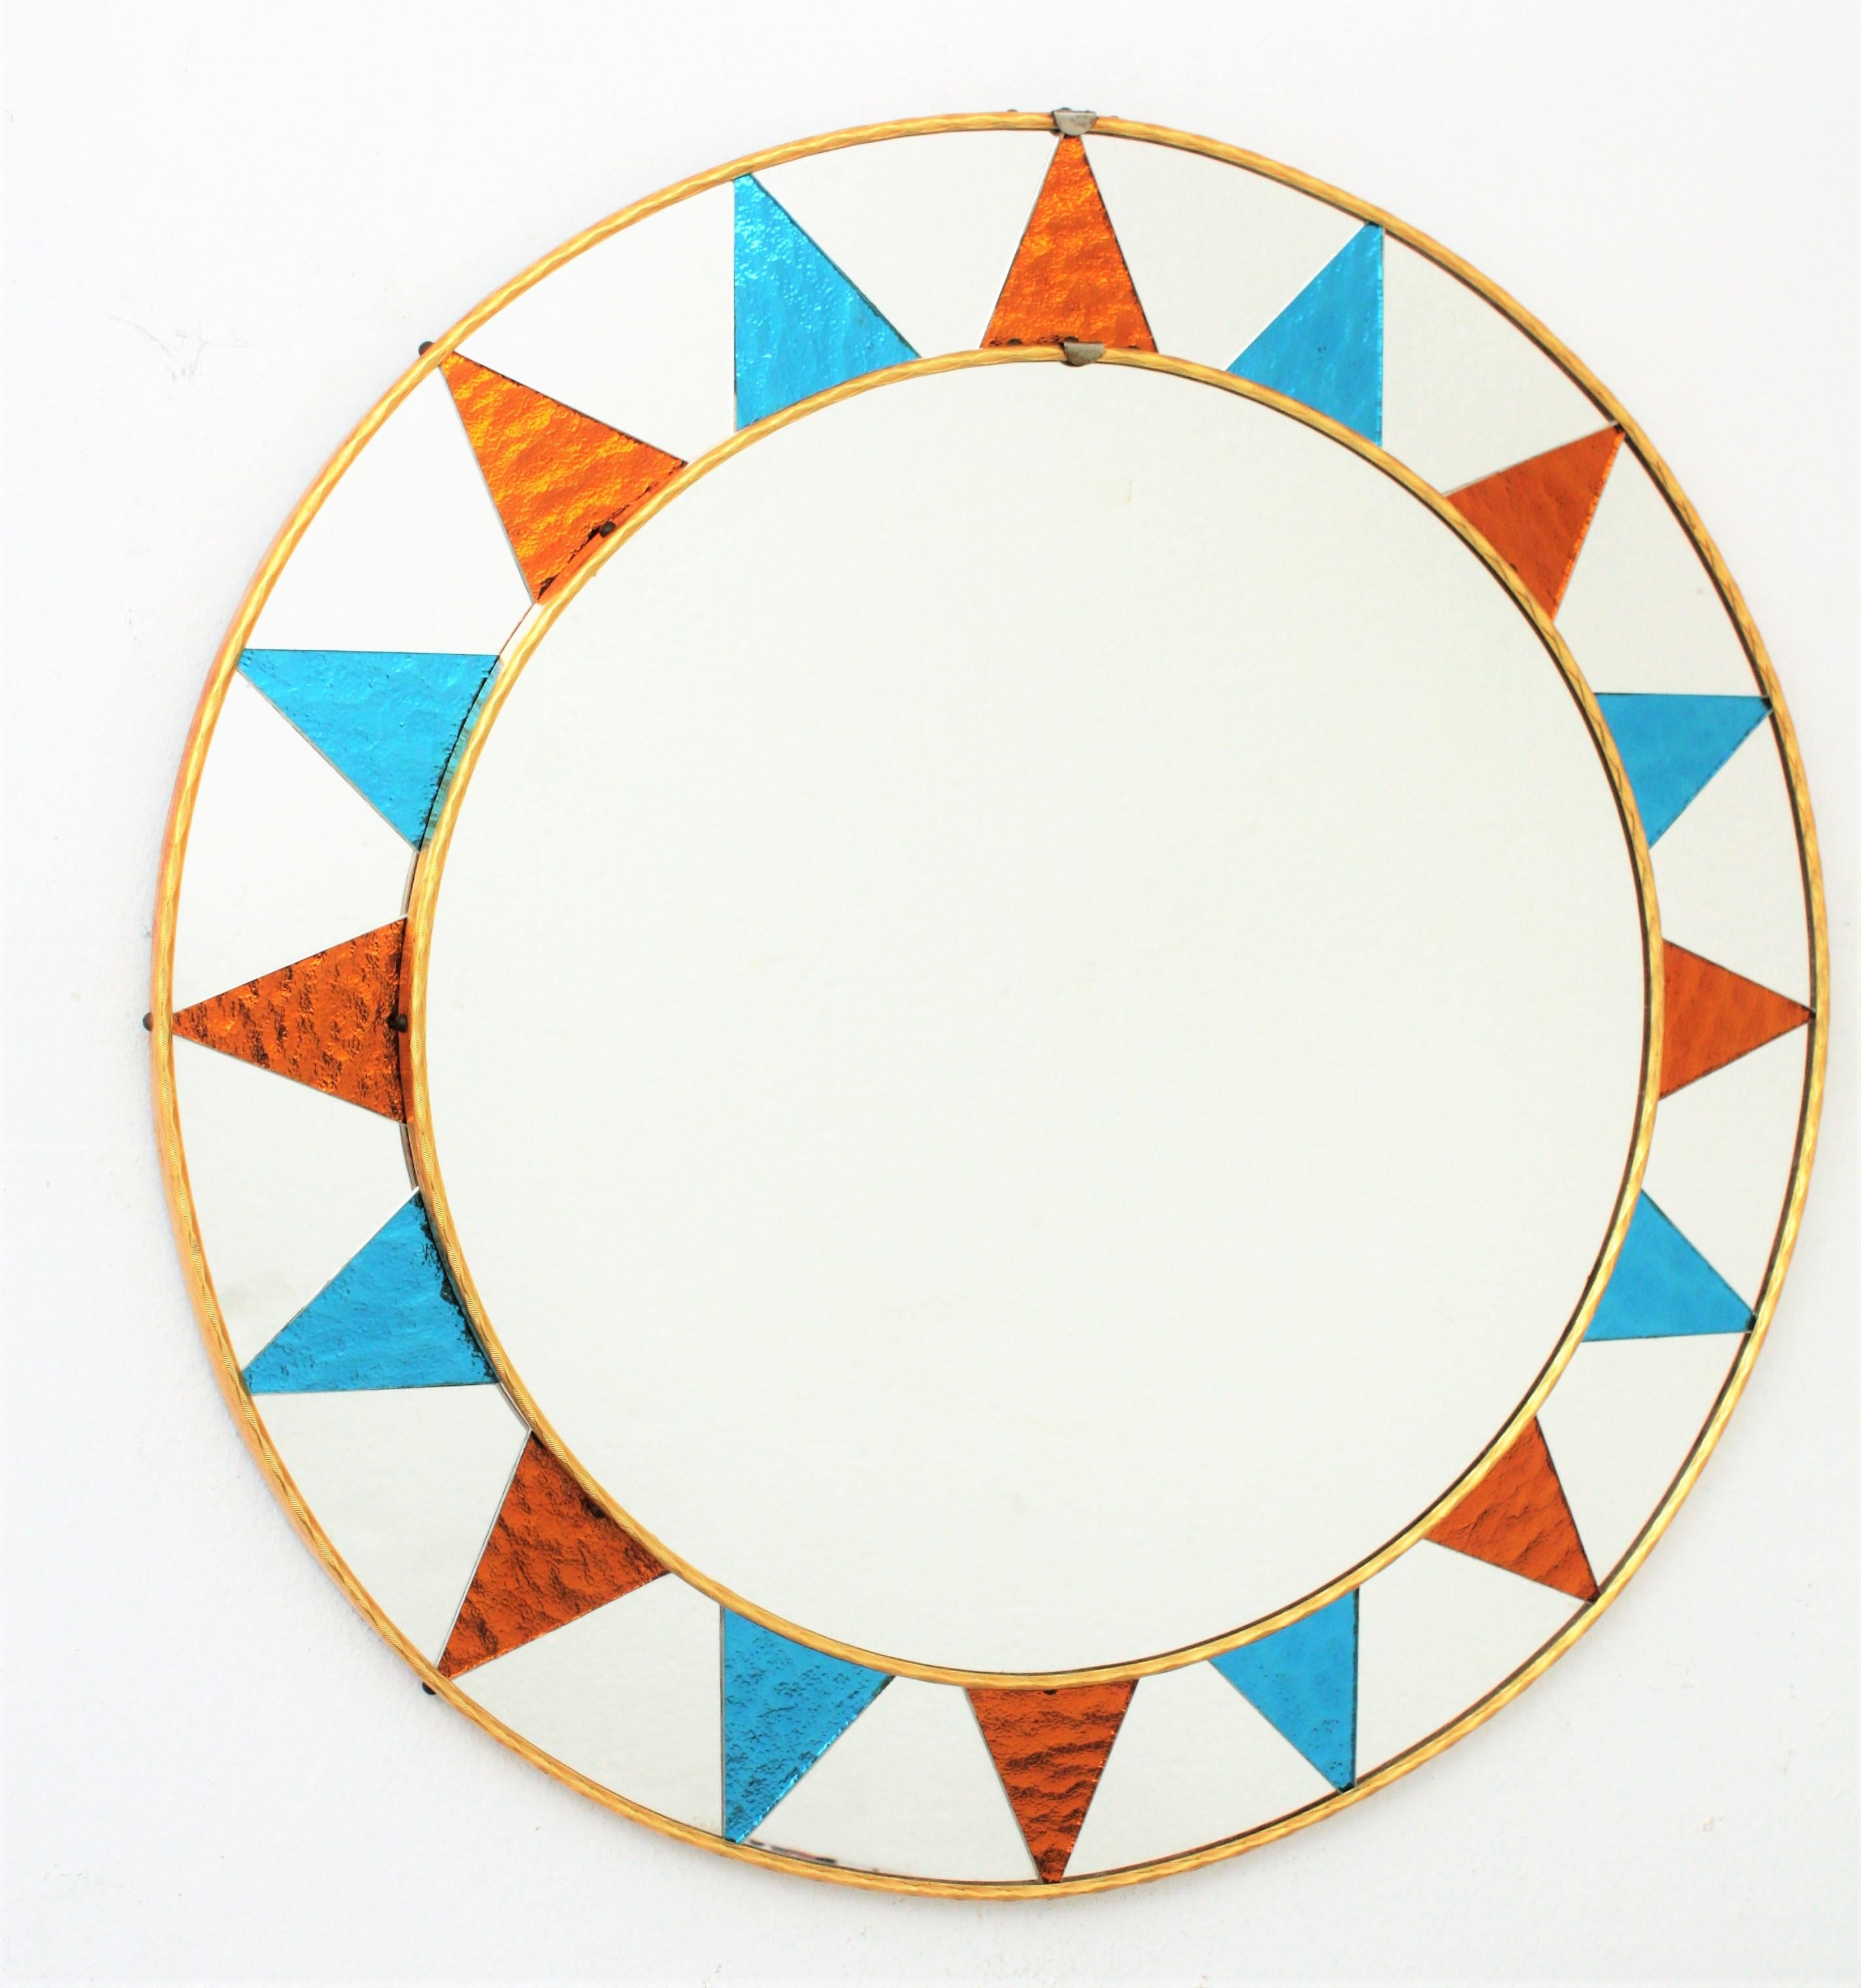 A highly decorative Mid-Century Modern circular mirror with a frame composed by pieces of glass mirrors, and textured mirrored glass rays in blue and orange colors distributed creating a sunburst pattern. Spain, circa 1960s. 
Overall diameter: 59 cm